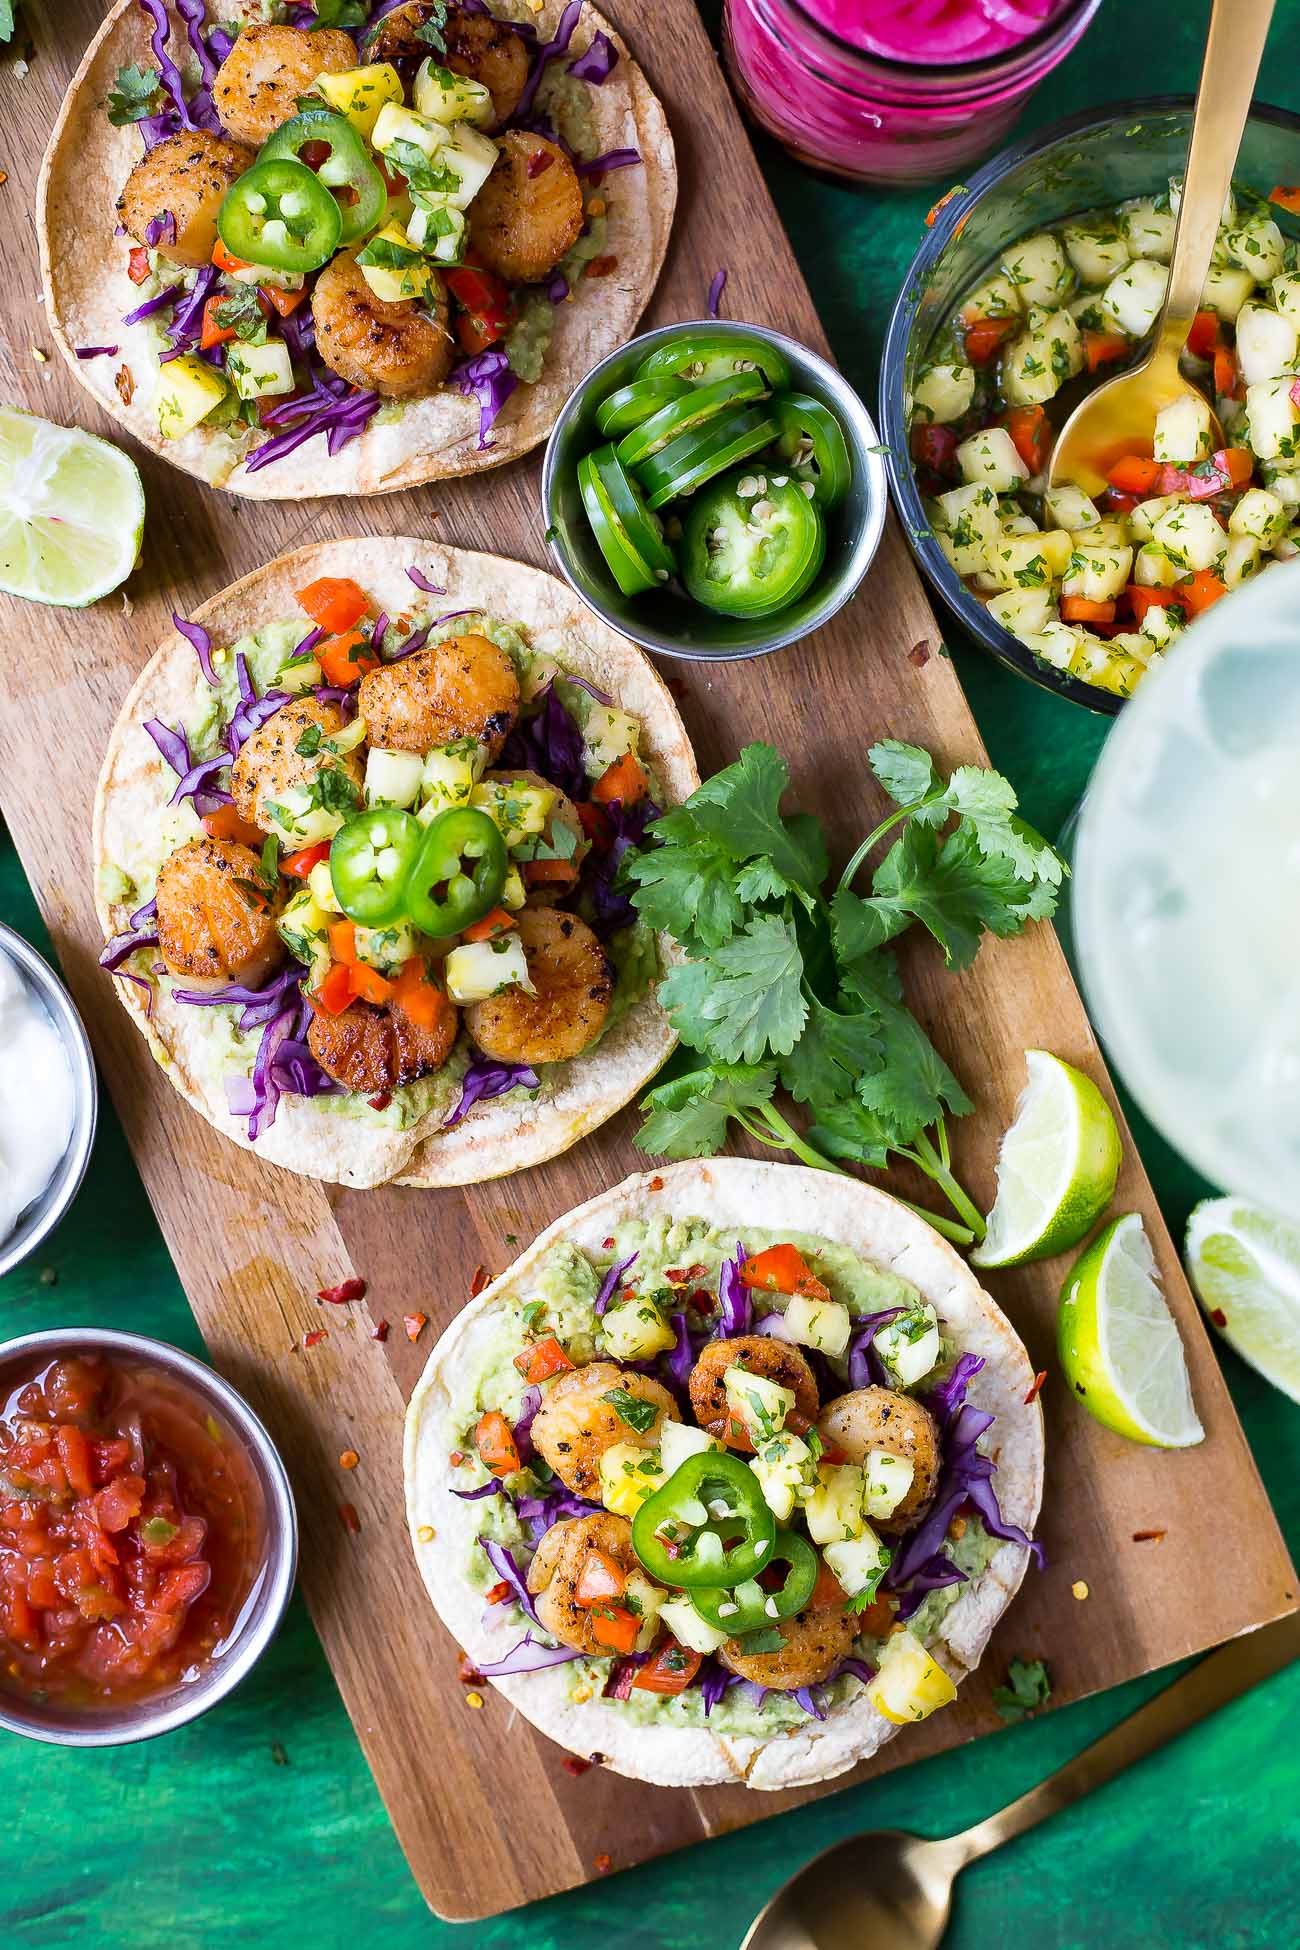 Scallop Tacos with Pineapple Salsa - Egmont Seafoods